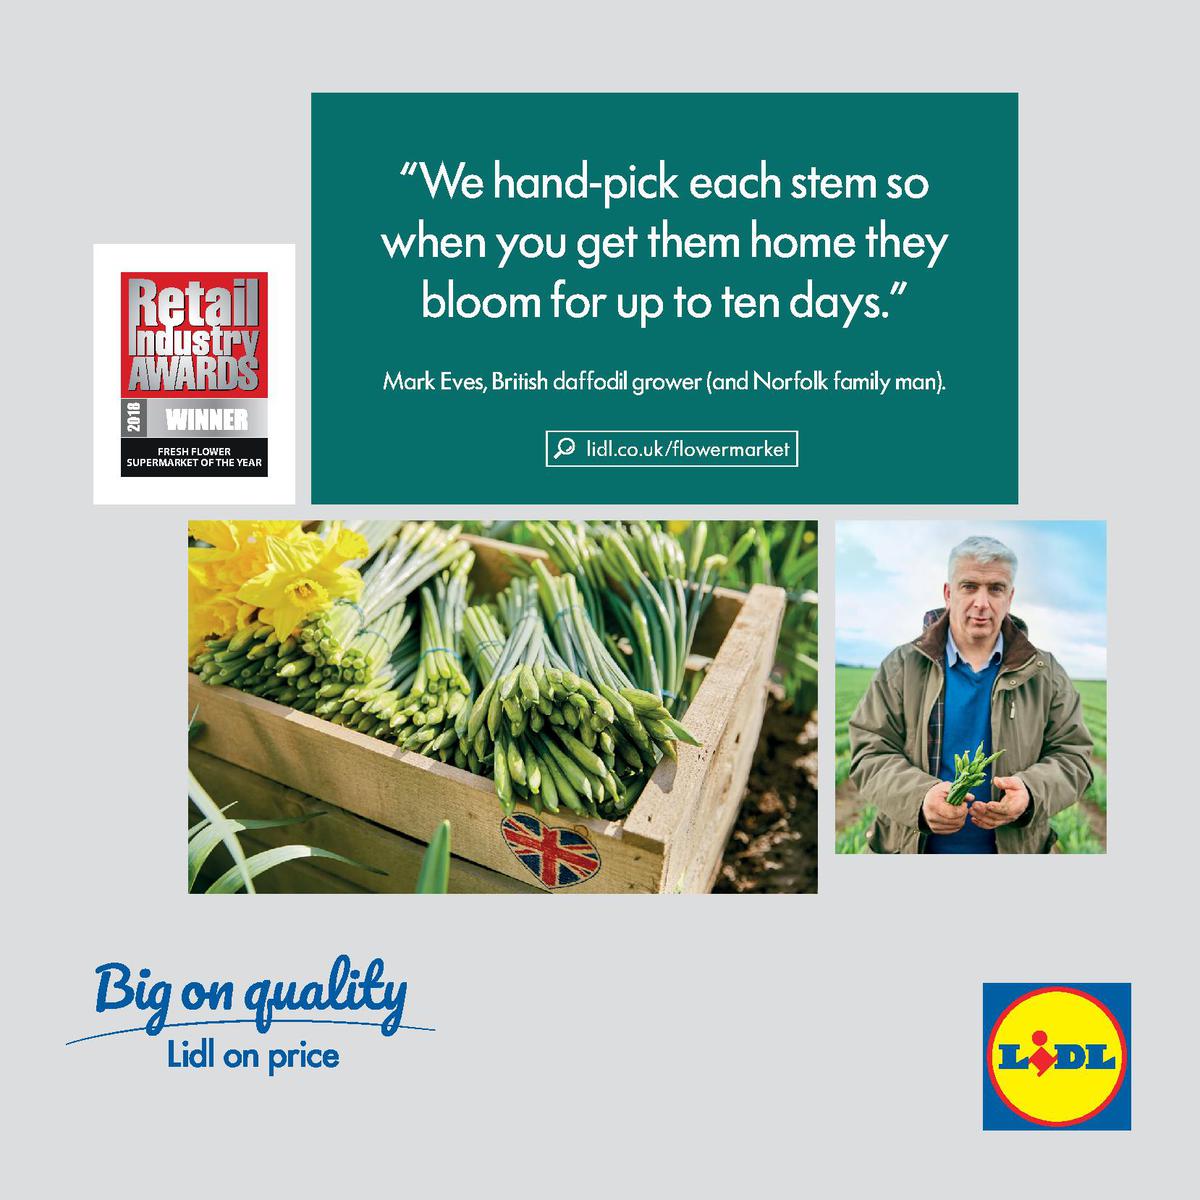 LIDL Spring Offers from 1 March